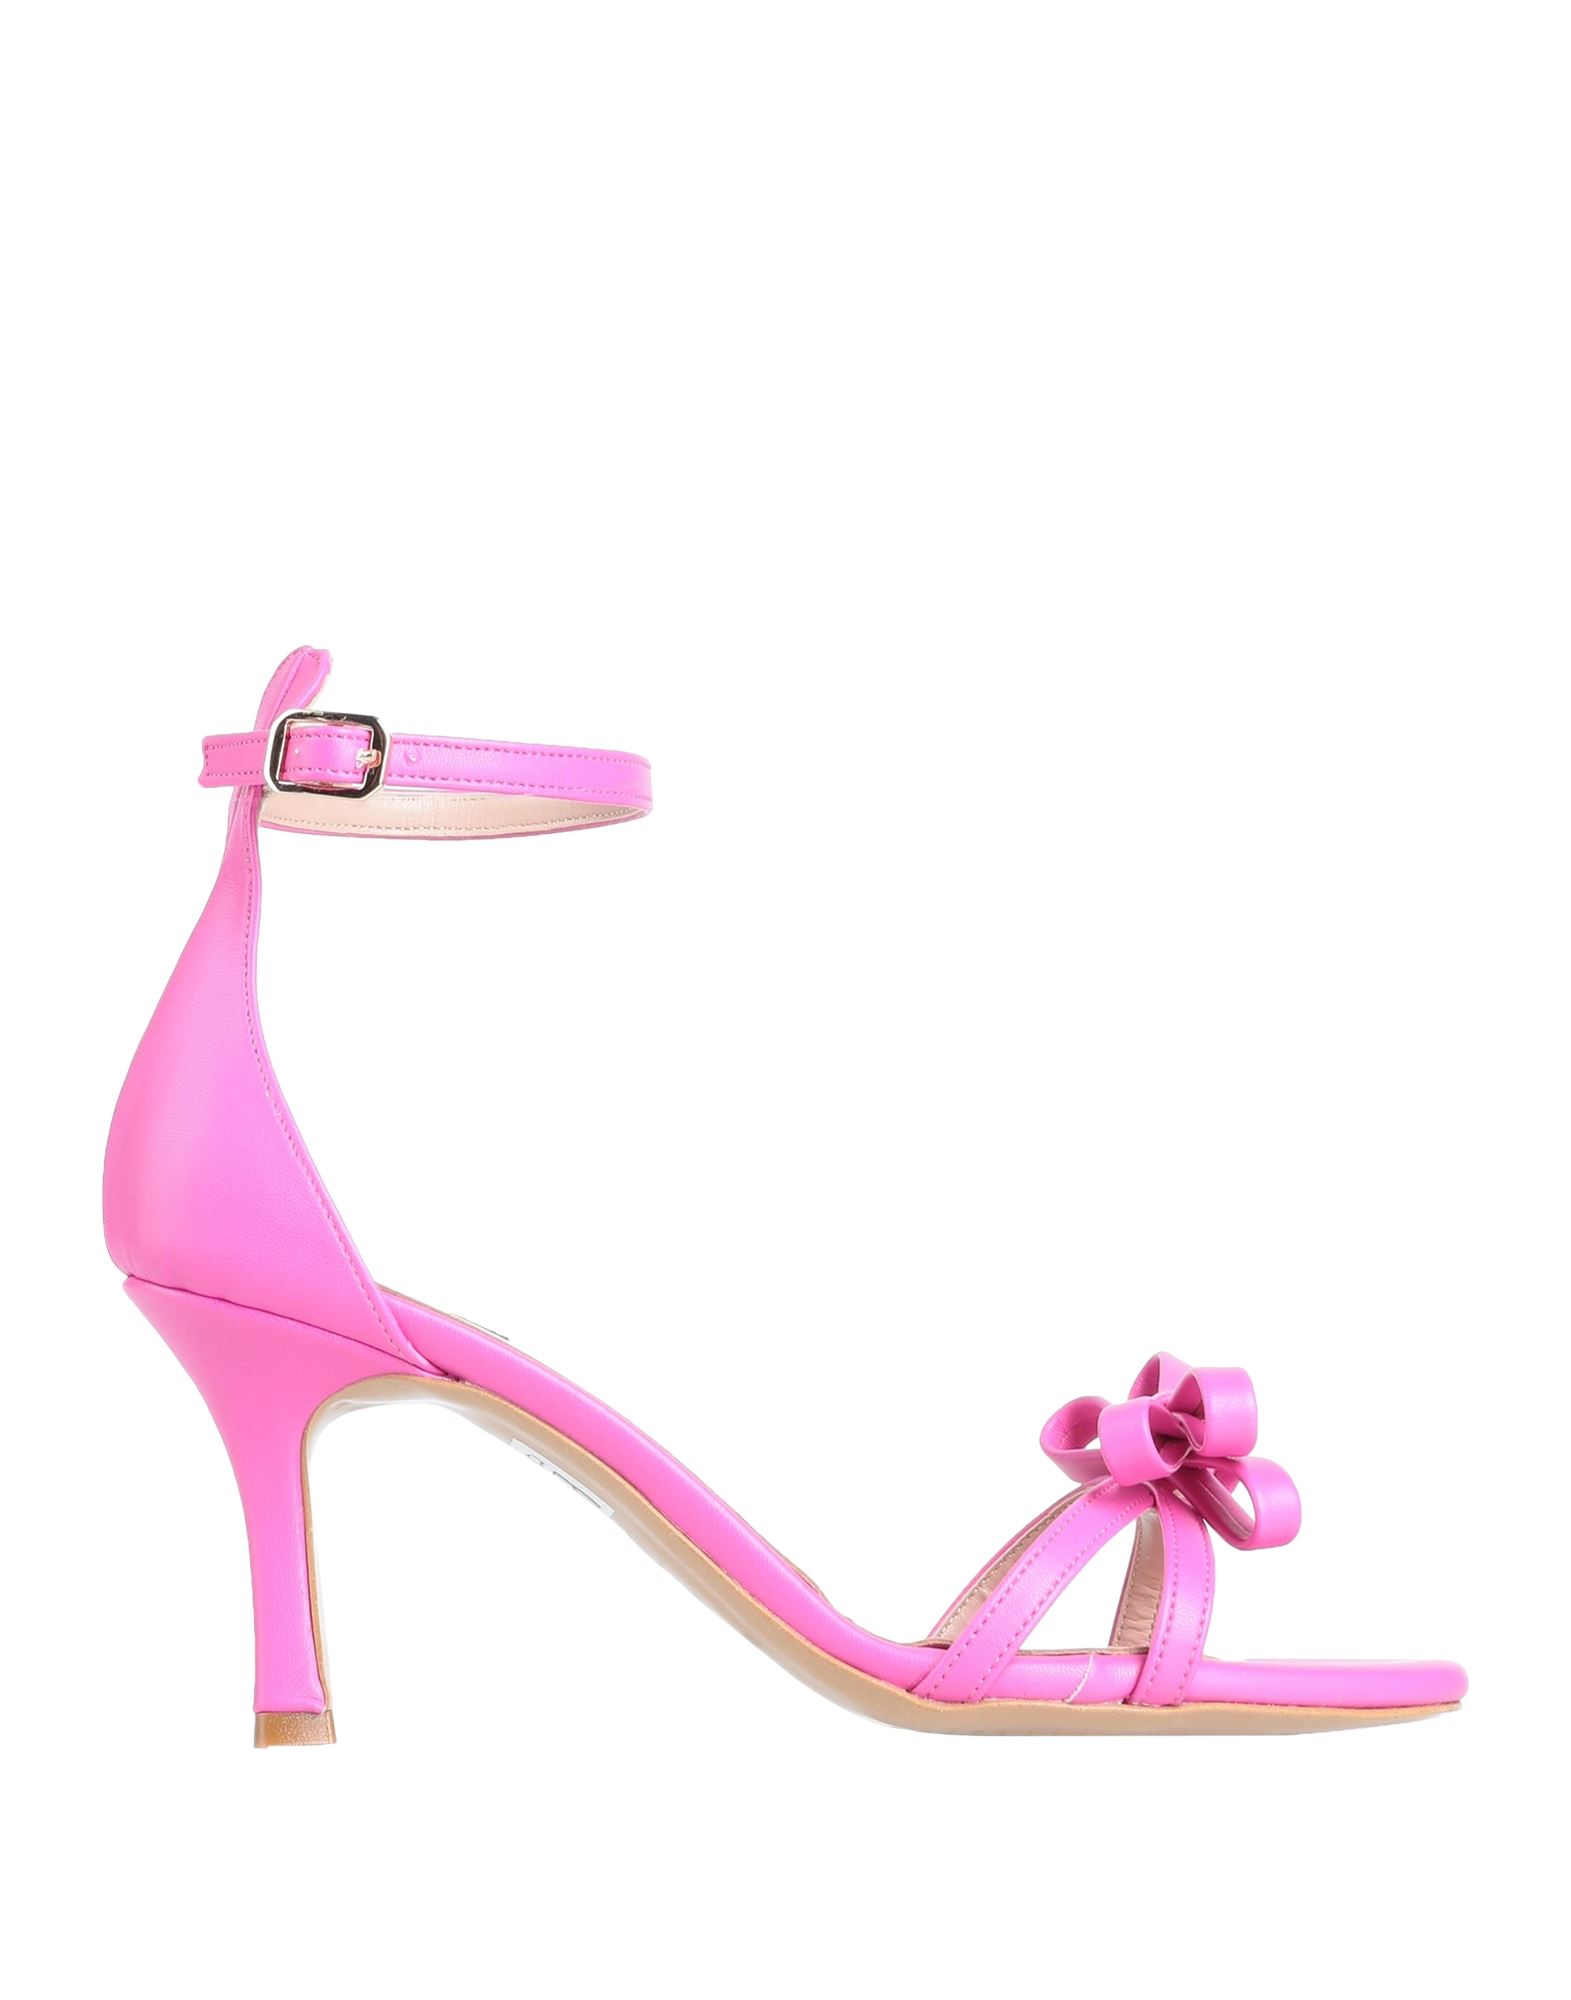 Islo Isabella Lorusso Sandals In Pink